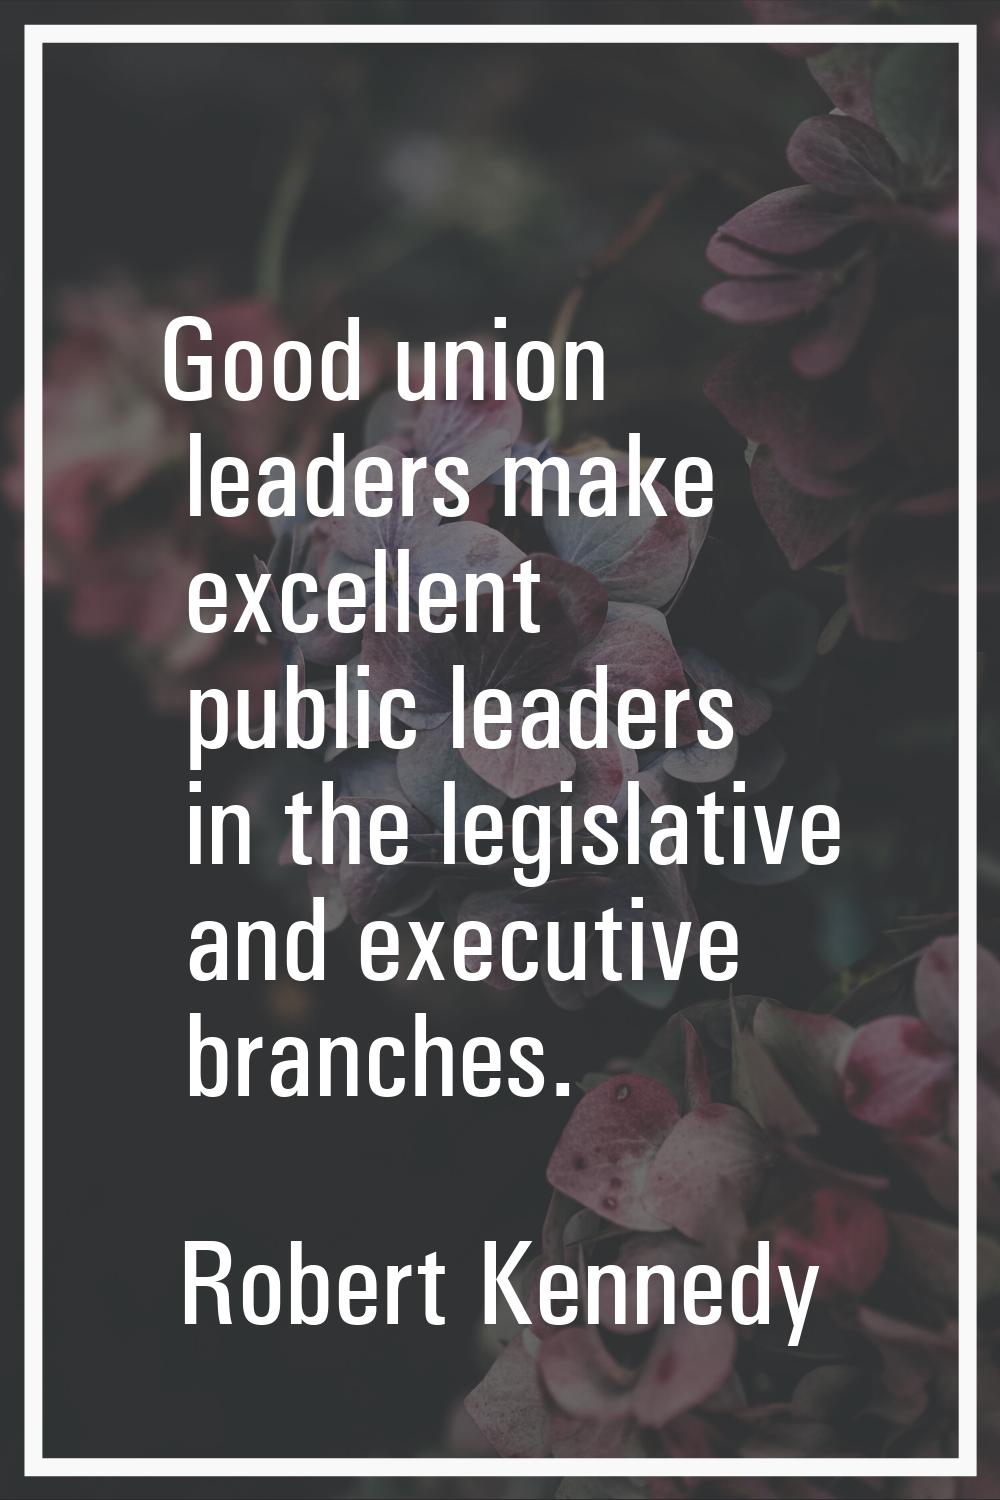 Good union leaders make excellent public leaders in the legislative and executive branches.